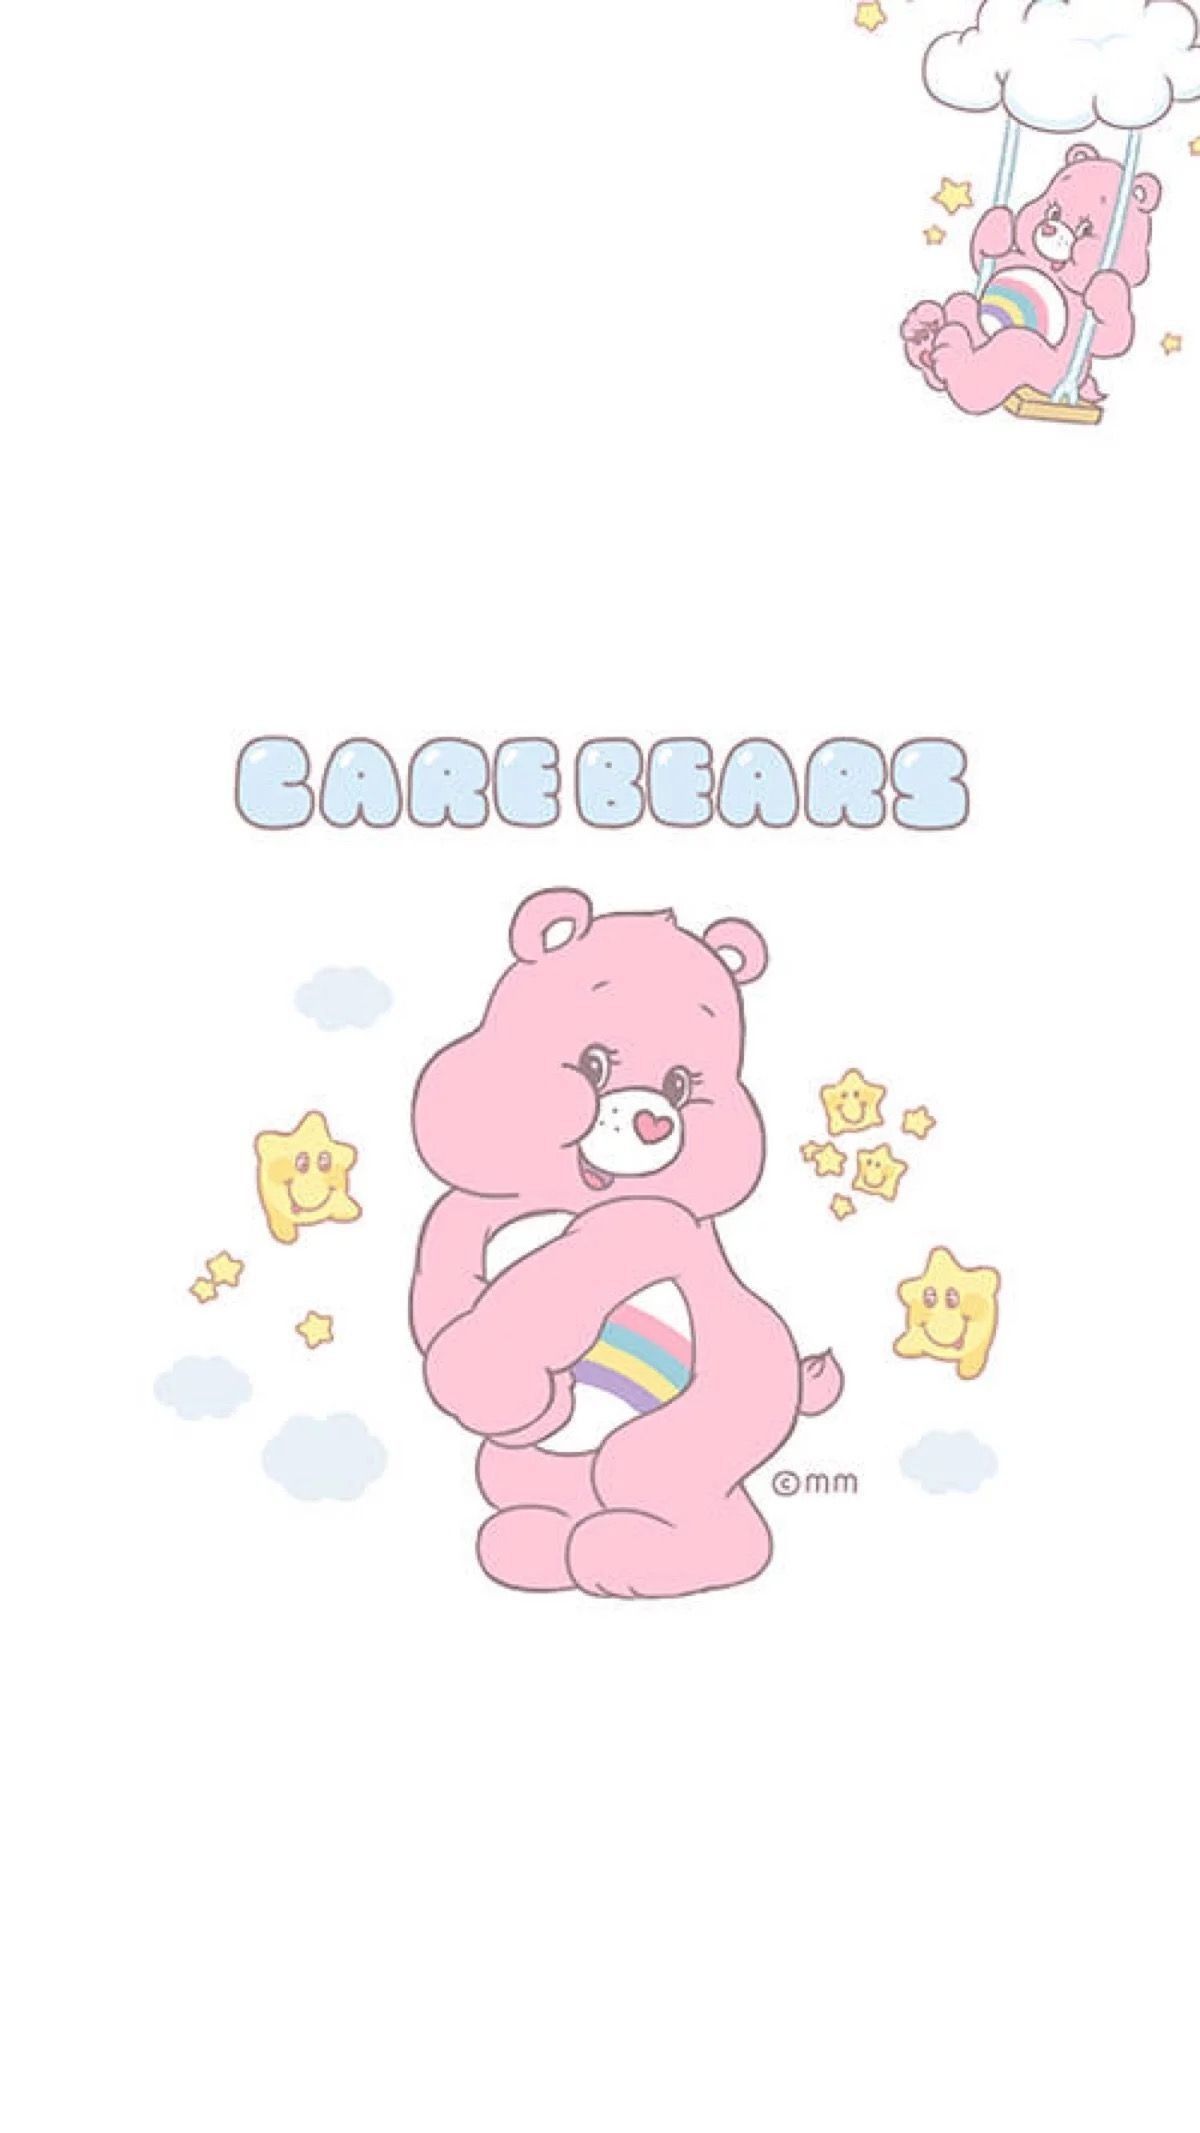 IPhone wallpaper with a pink bear and the words care bears - Care Bears